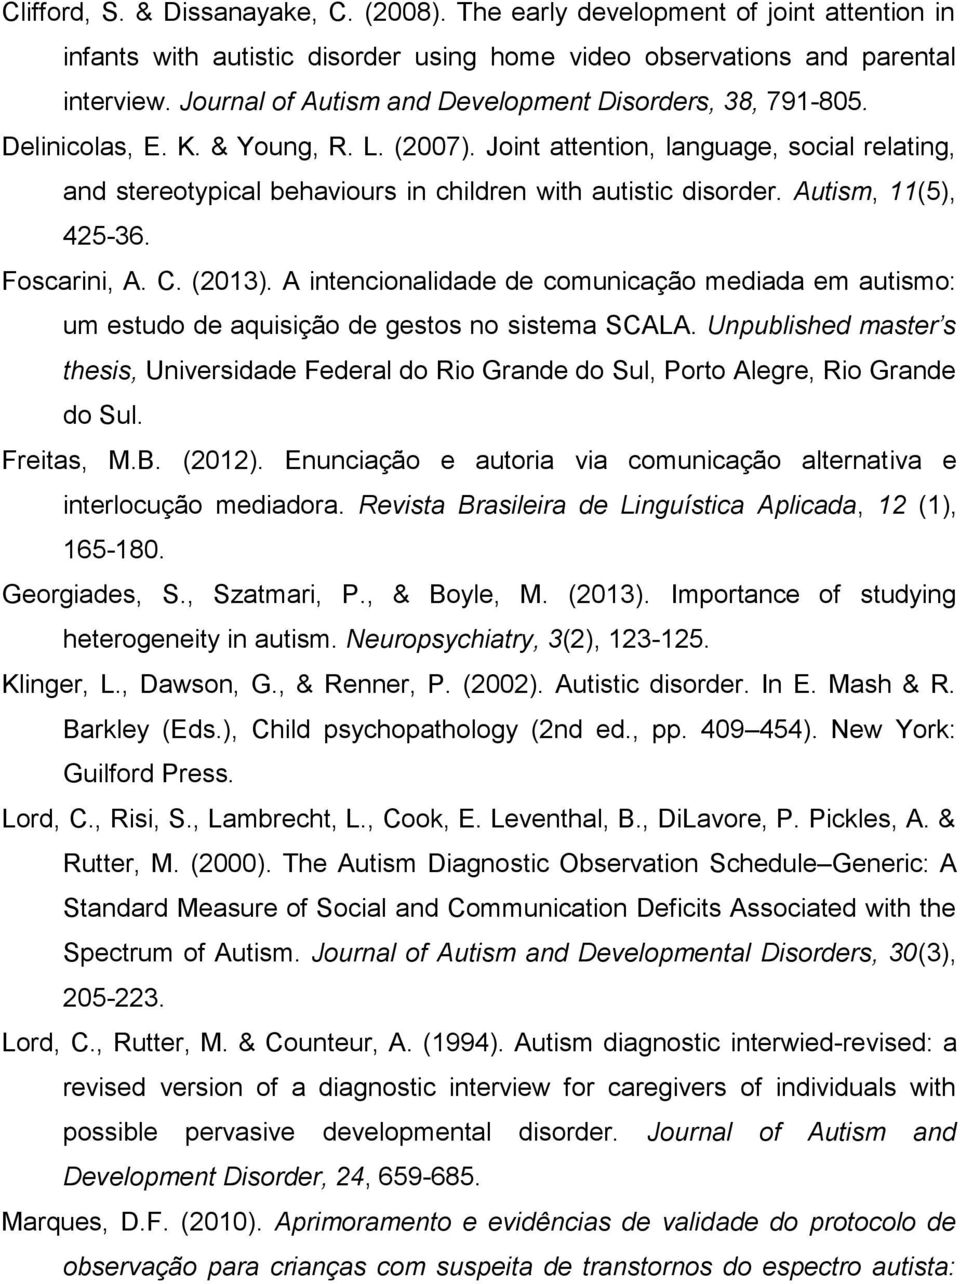 Joint attention, language, social relating, and stereotypical behaviours in children with autistic disorder. Autism, 11(5), 425-36. Foscarini, A. C. (2013).